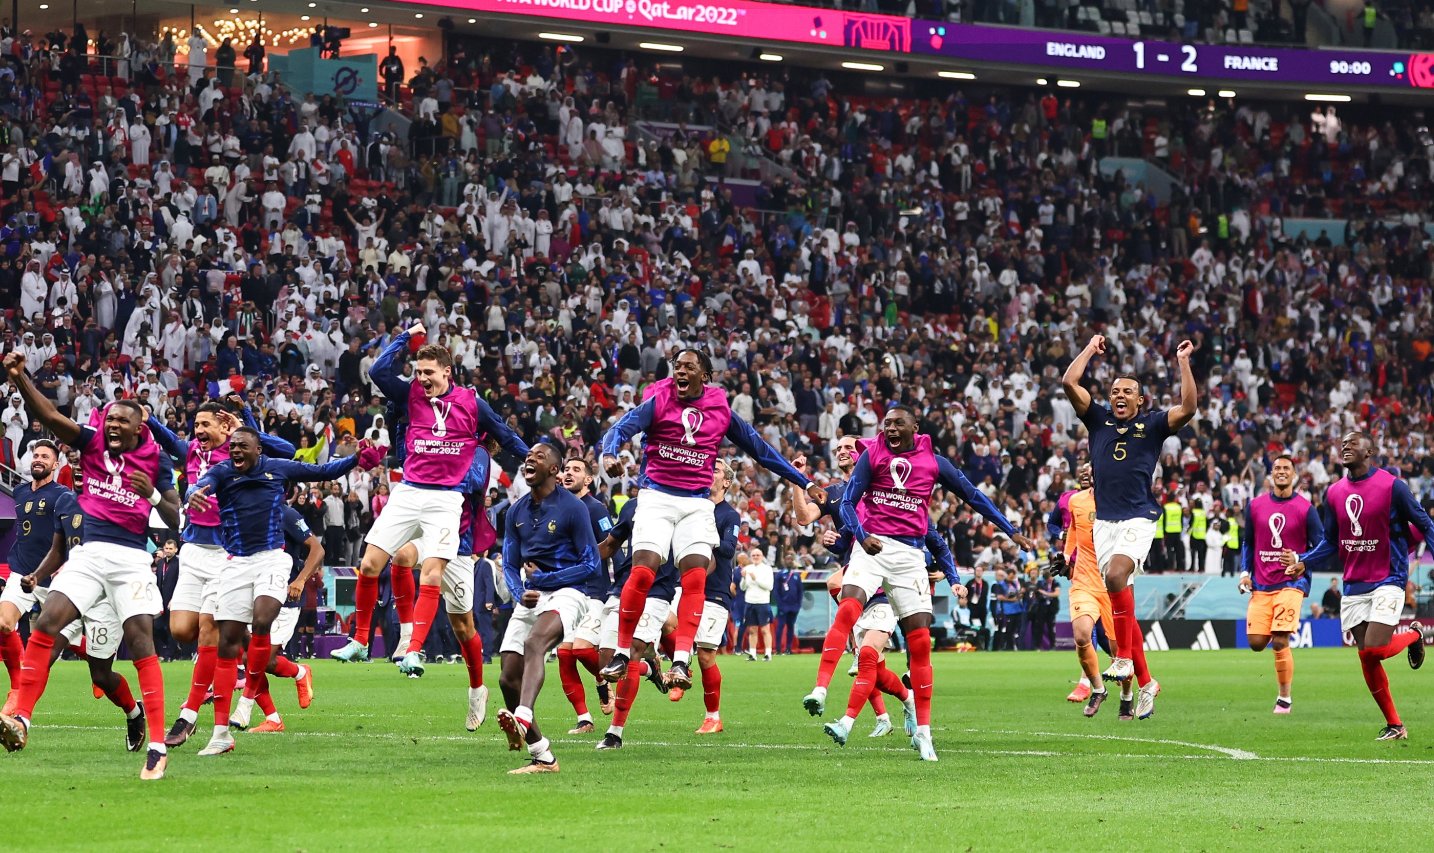 France beat England 2-1 to set up semi-final clash with Morocco in FIFA World Cup